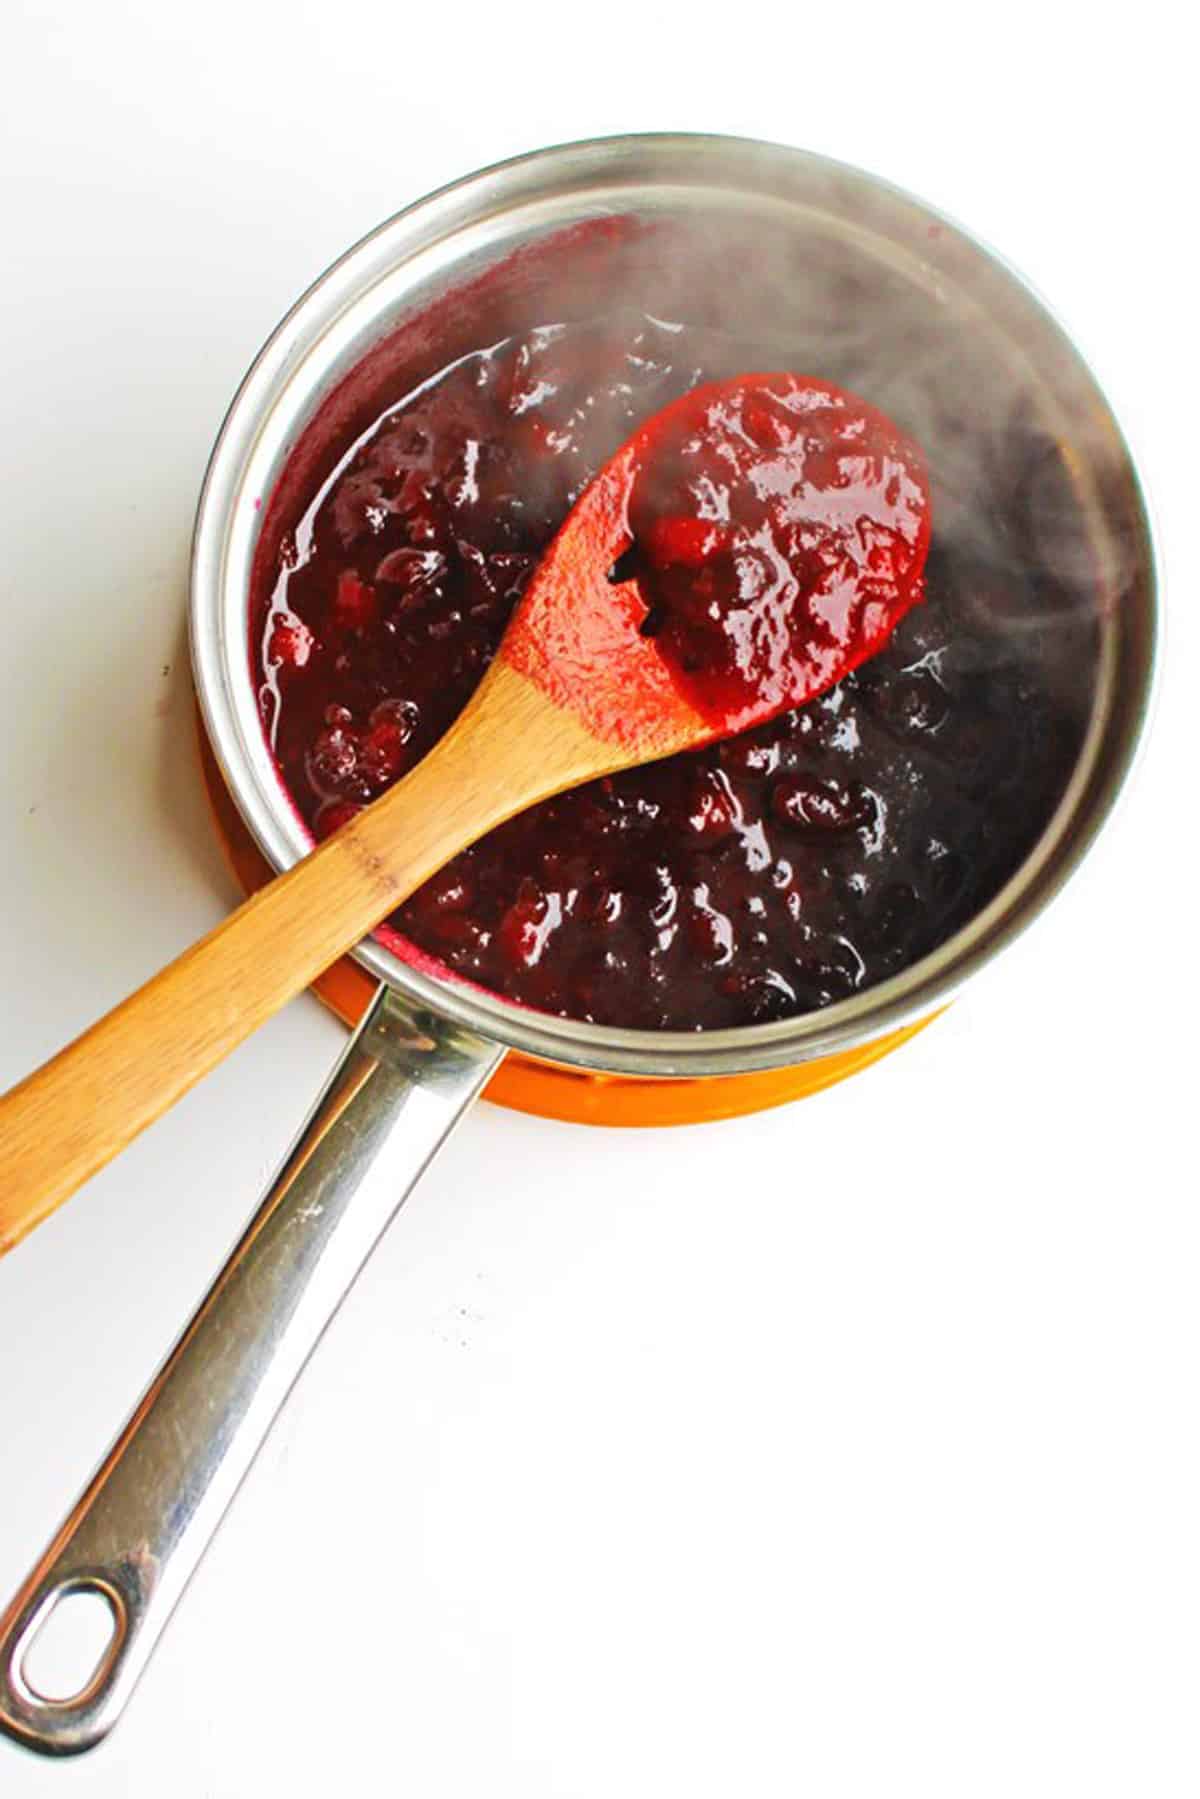 A photo of a wooden spoon in a pan of cooked cranberry sauce.